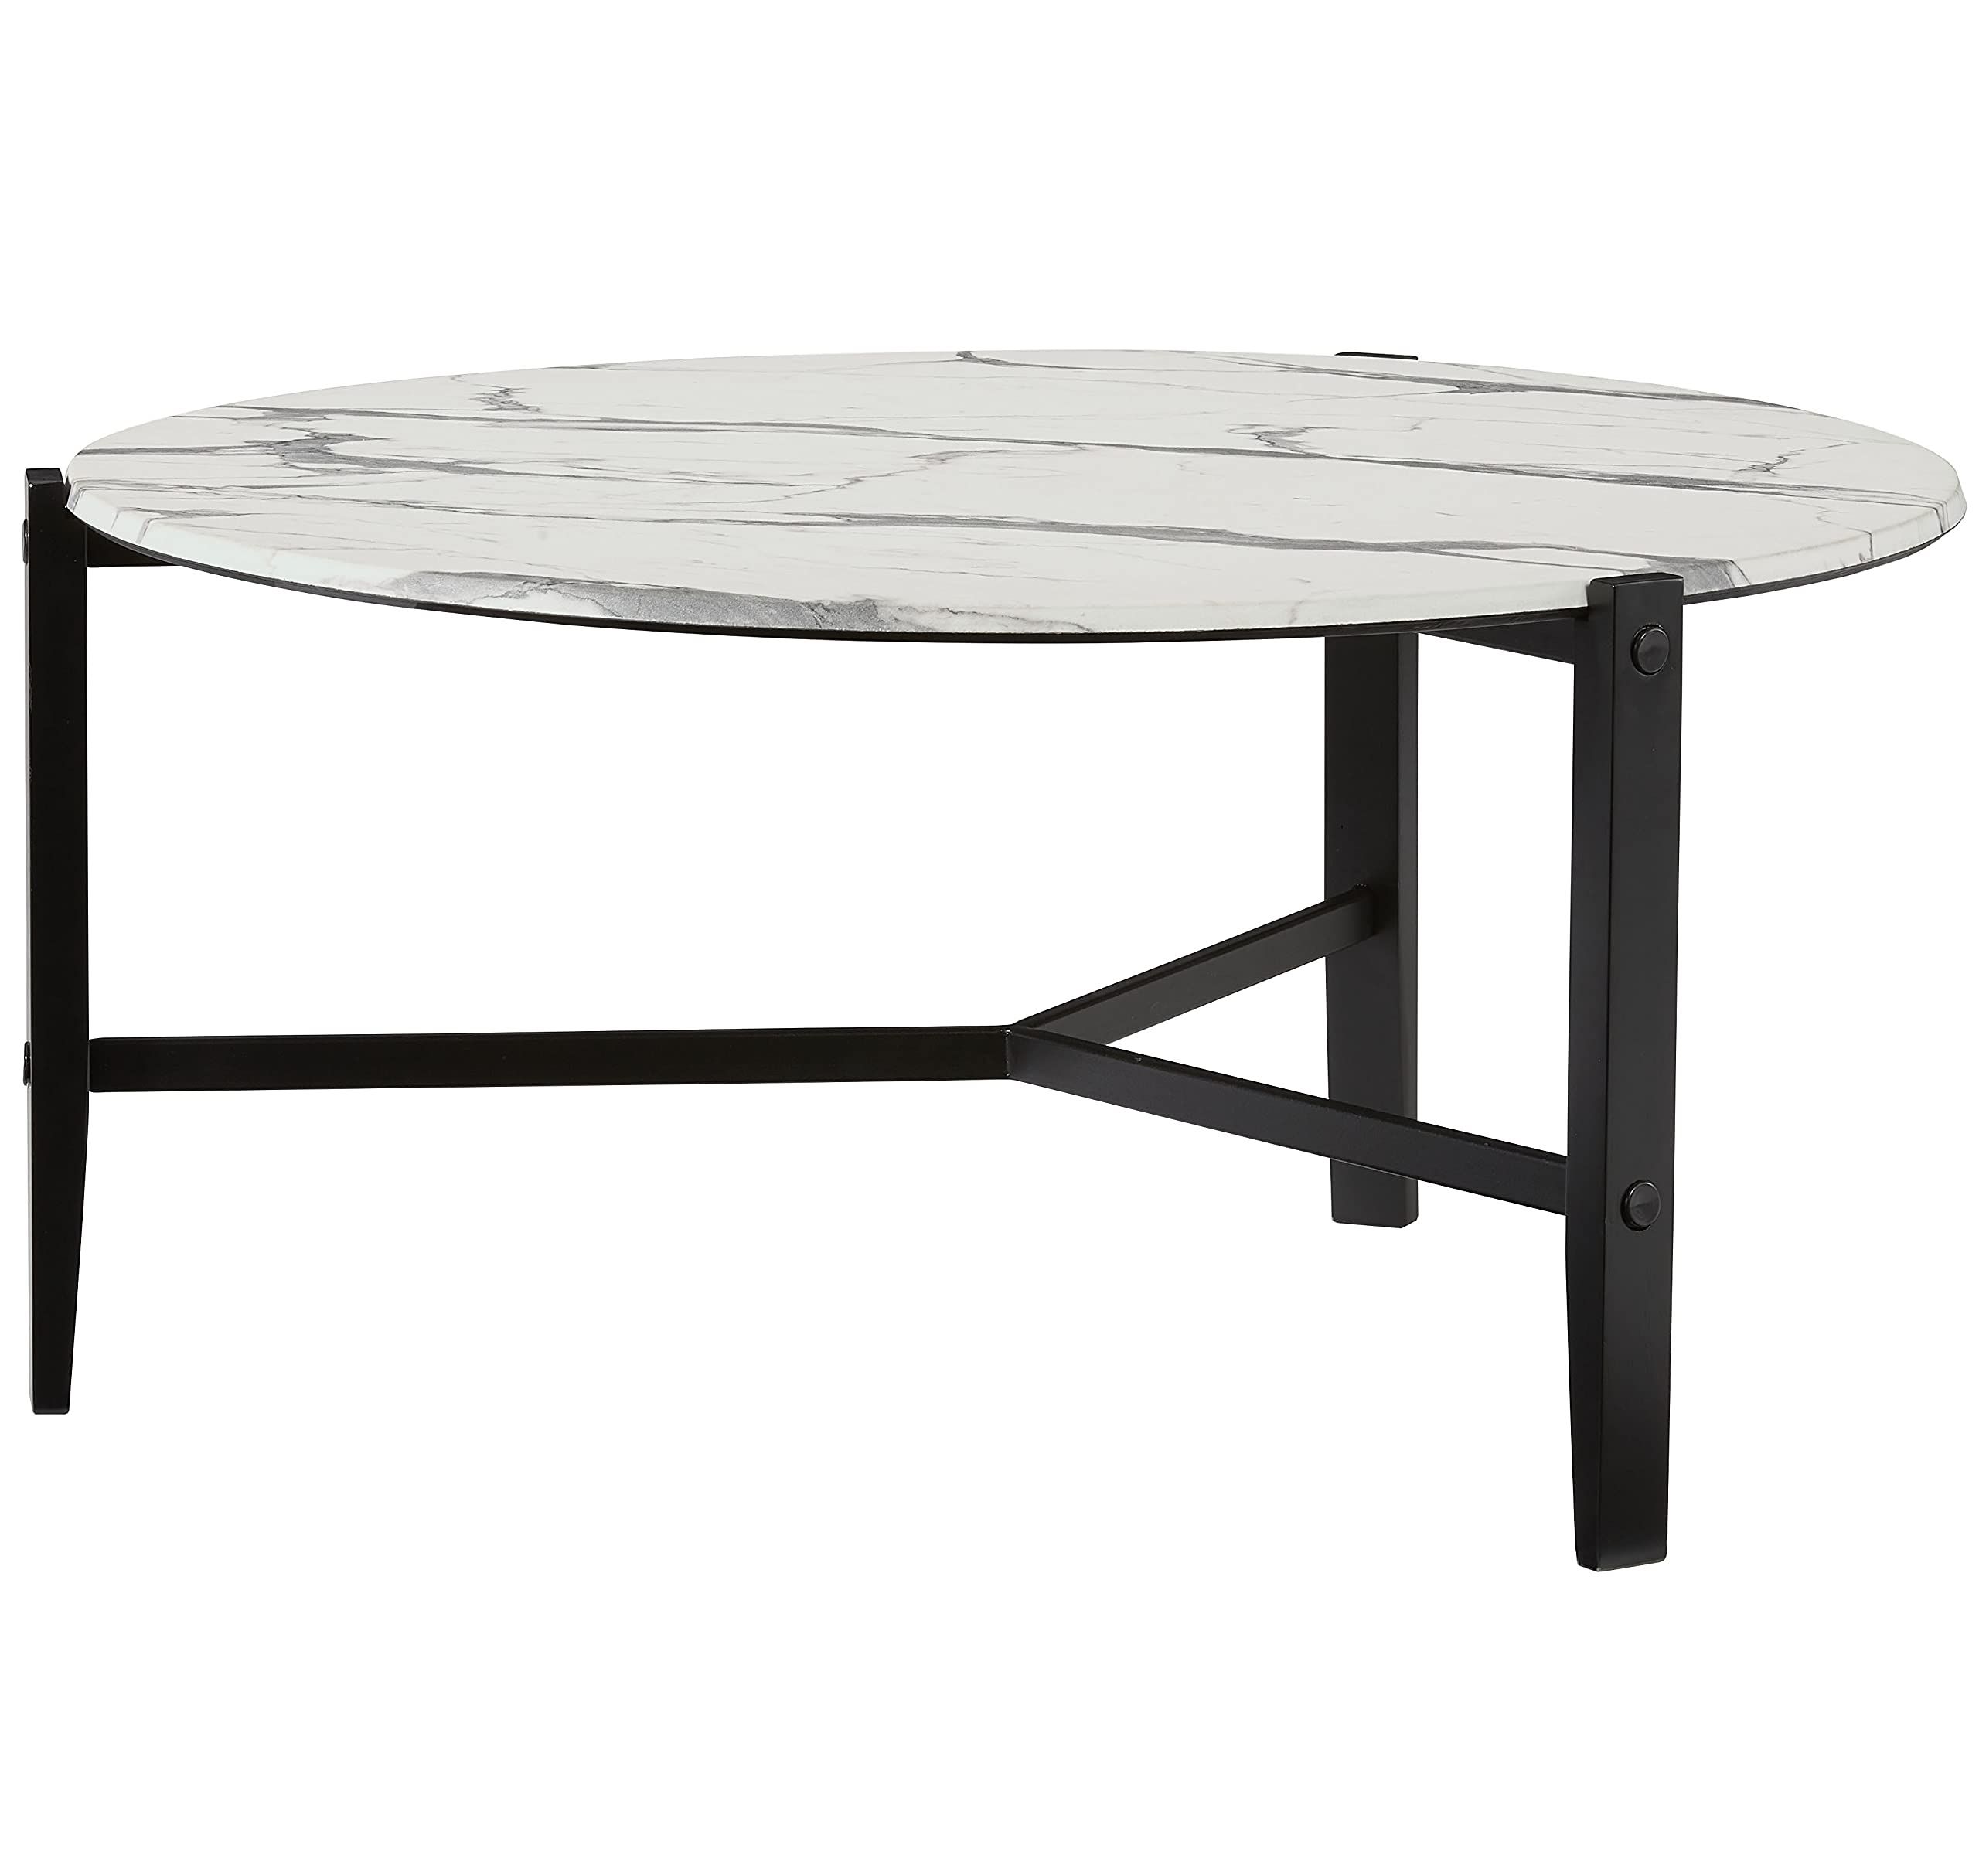 Progressive Furniture Cocktail Tables Pertaining To 2020 Amazon: Progressive Furniture Rowen Cocktail Table, Black : Home &  Kitchen (View 4 of 10)